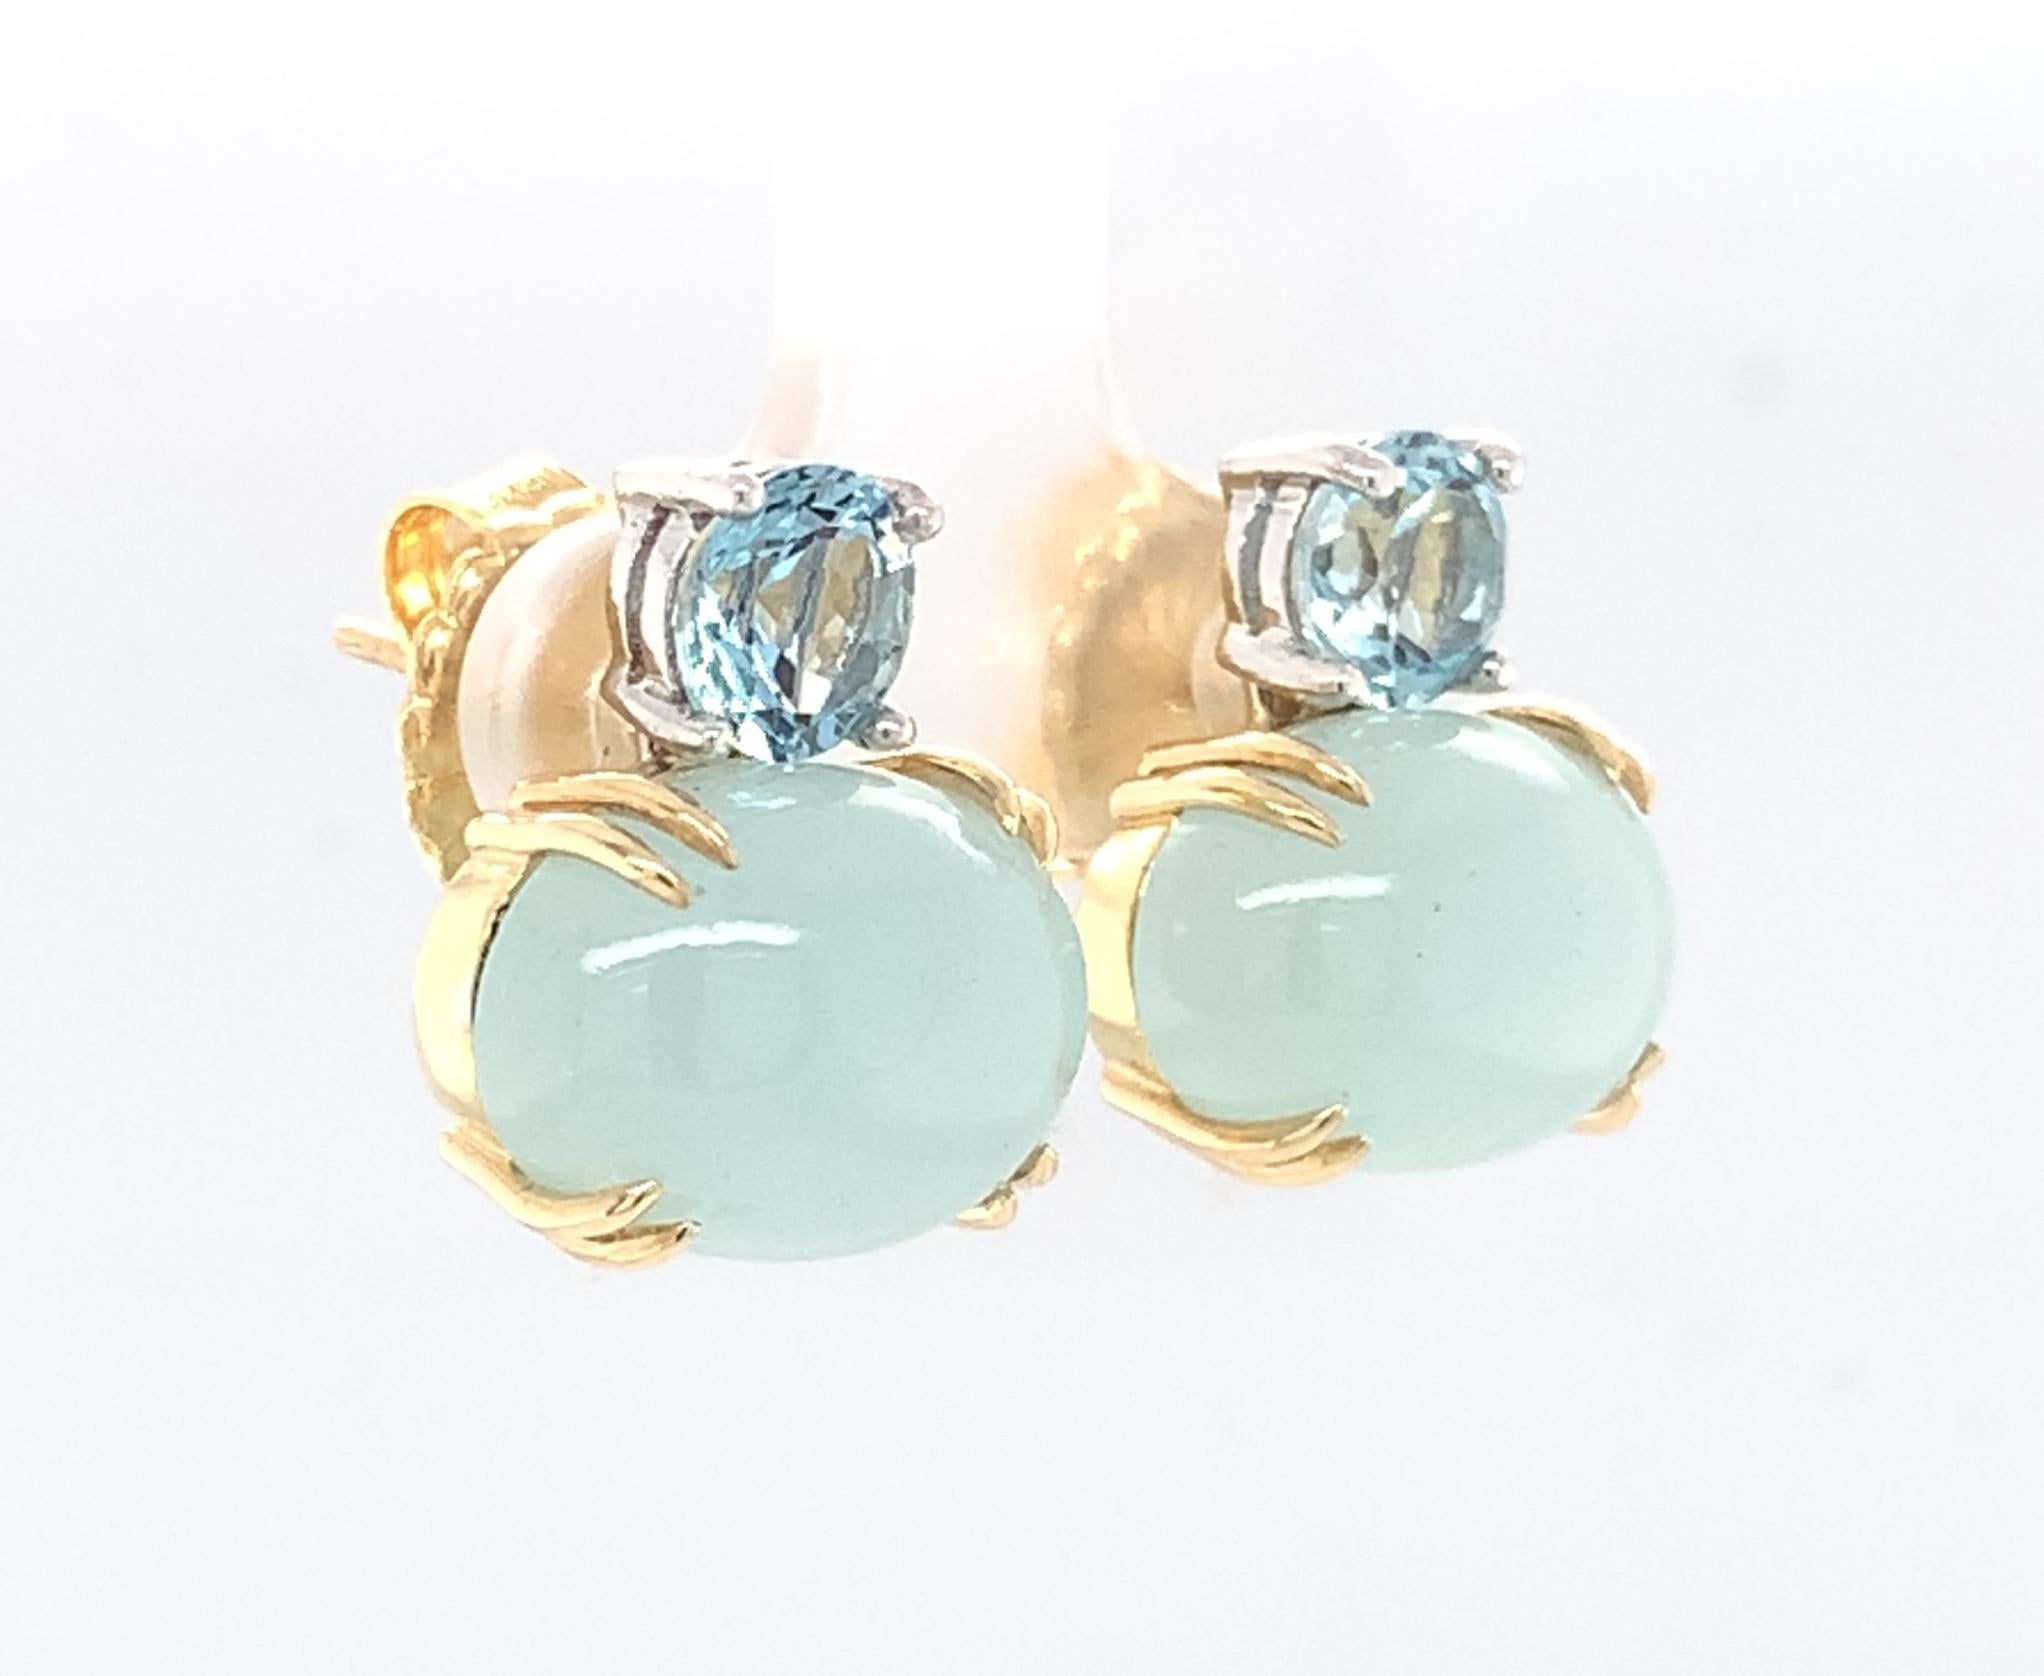 Faceted and Cabochon Aquamarine Drop Earrings in White and Yellow Gold 5